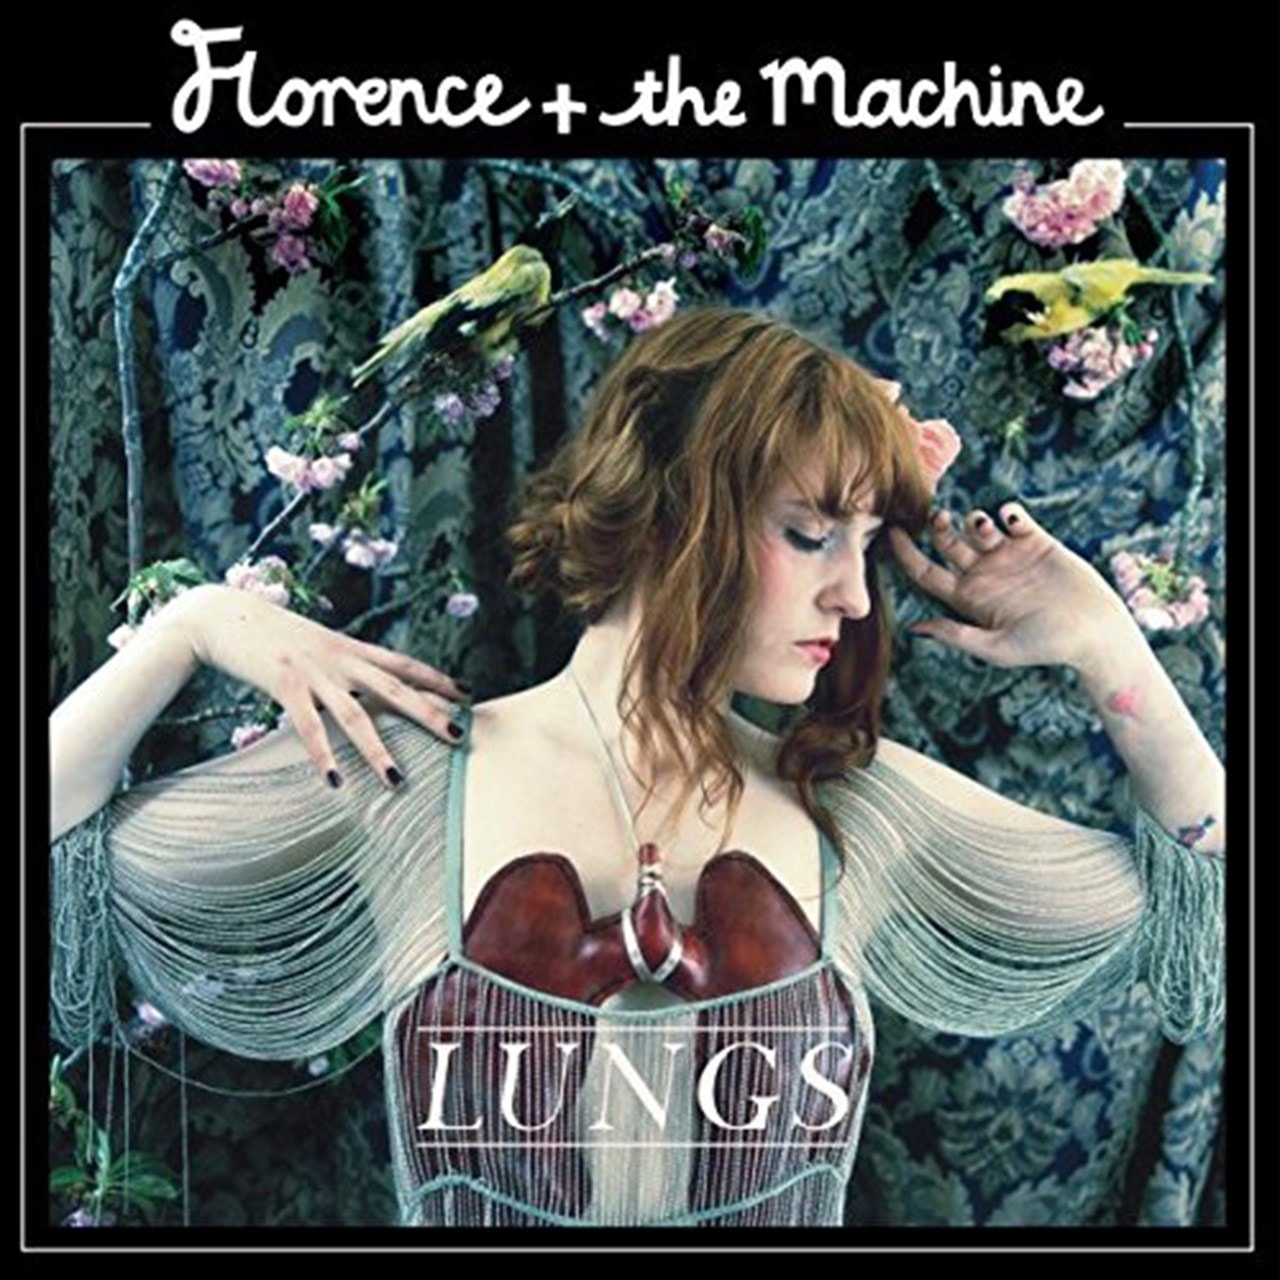 FLORENCE + THE MACHINE - Lungs - LP - Vinyl